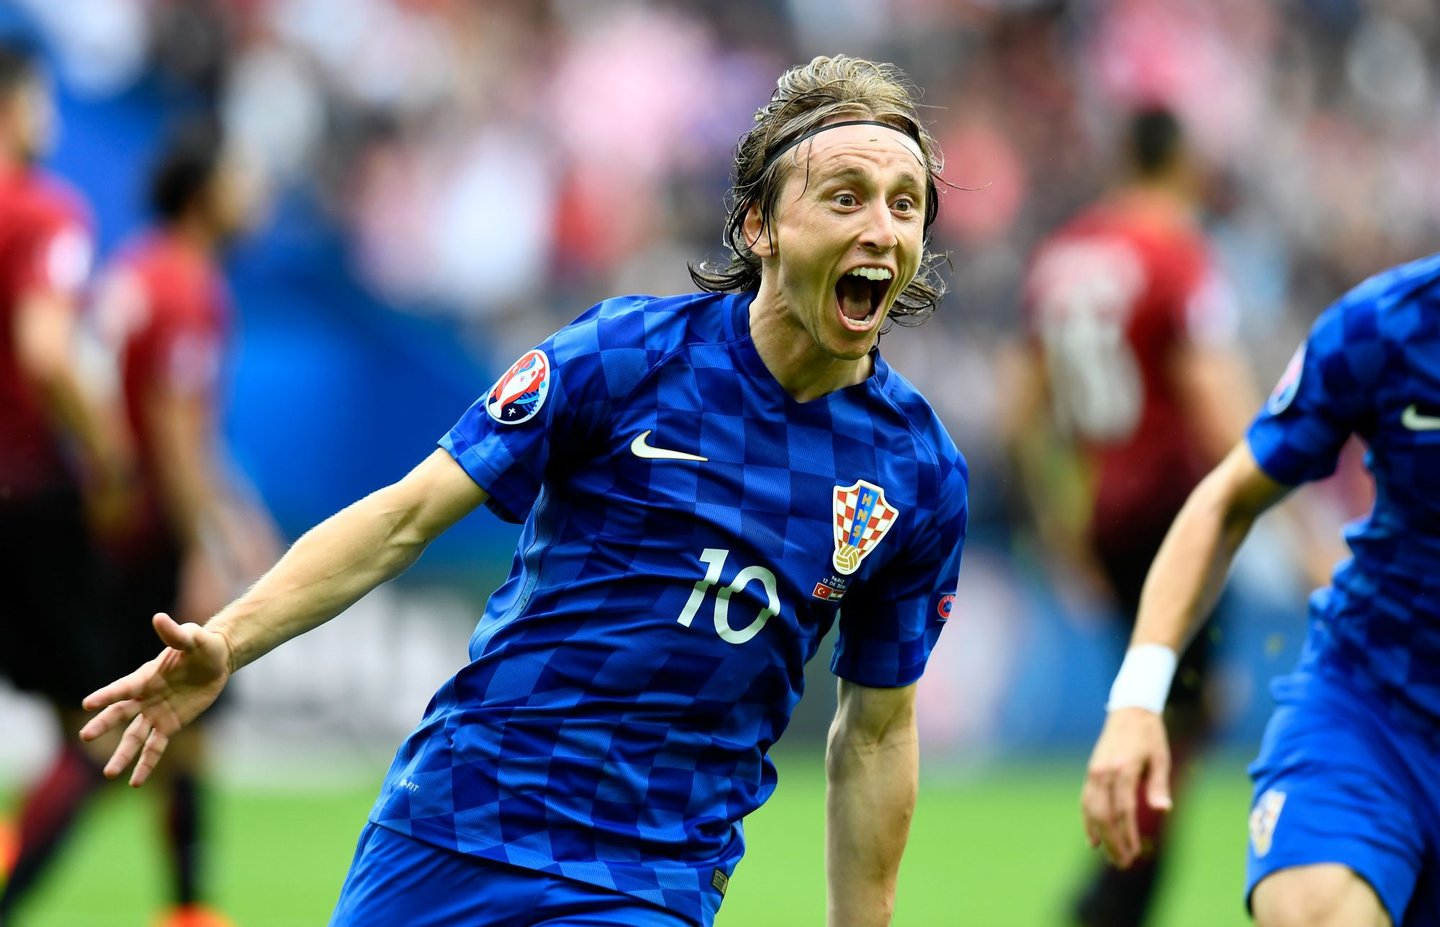 PARIS, FRANCE - JUNE 12: Luka Modric of Croatia celebrates scoring his team's first goal during the UEFA EURO 2016 Group D match between Turkey and Croatia at Parc des Princes on June 12, 2016 in Paris, France. (Photo by Mike Hewitt/Getty Images)